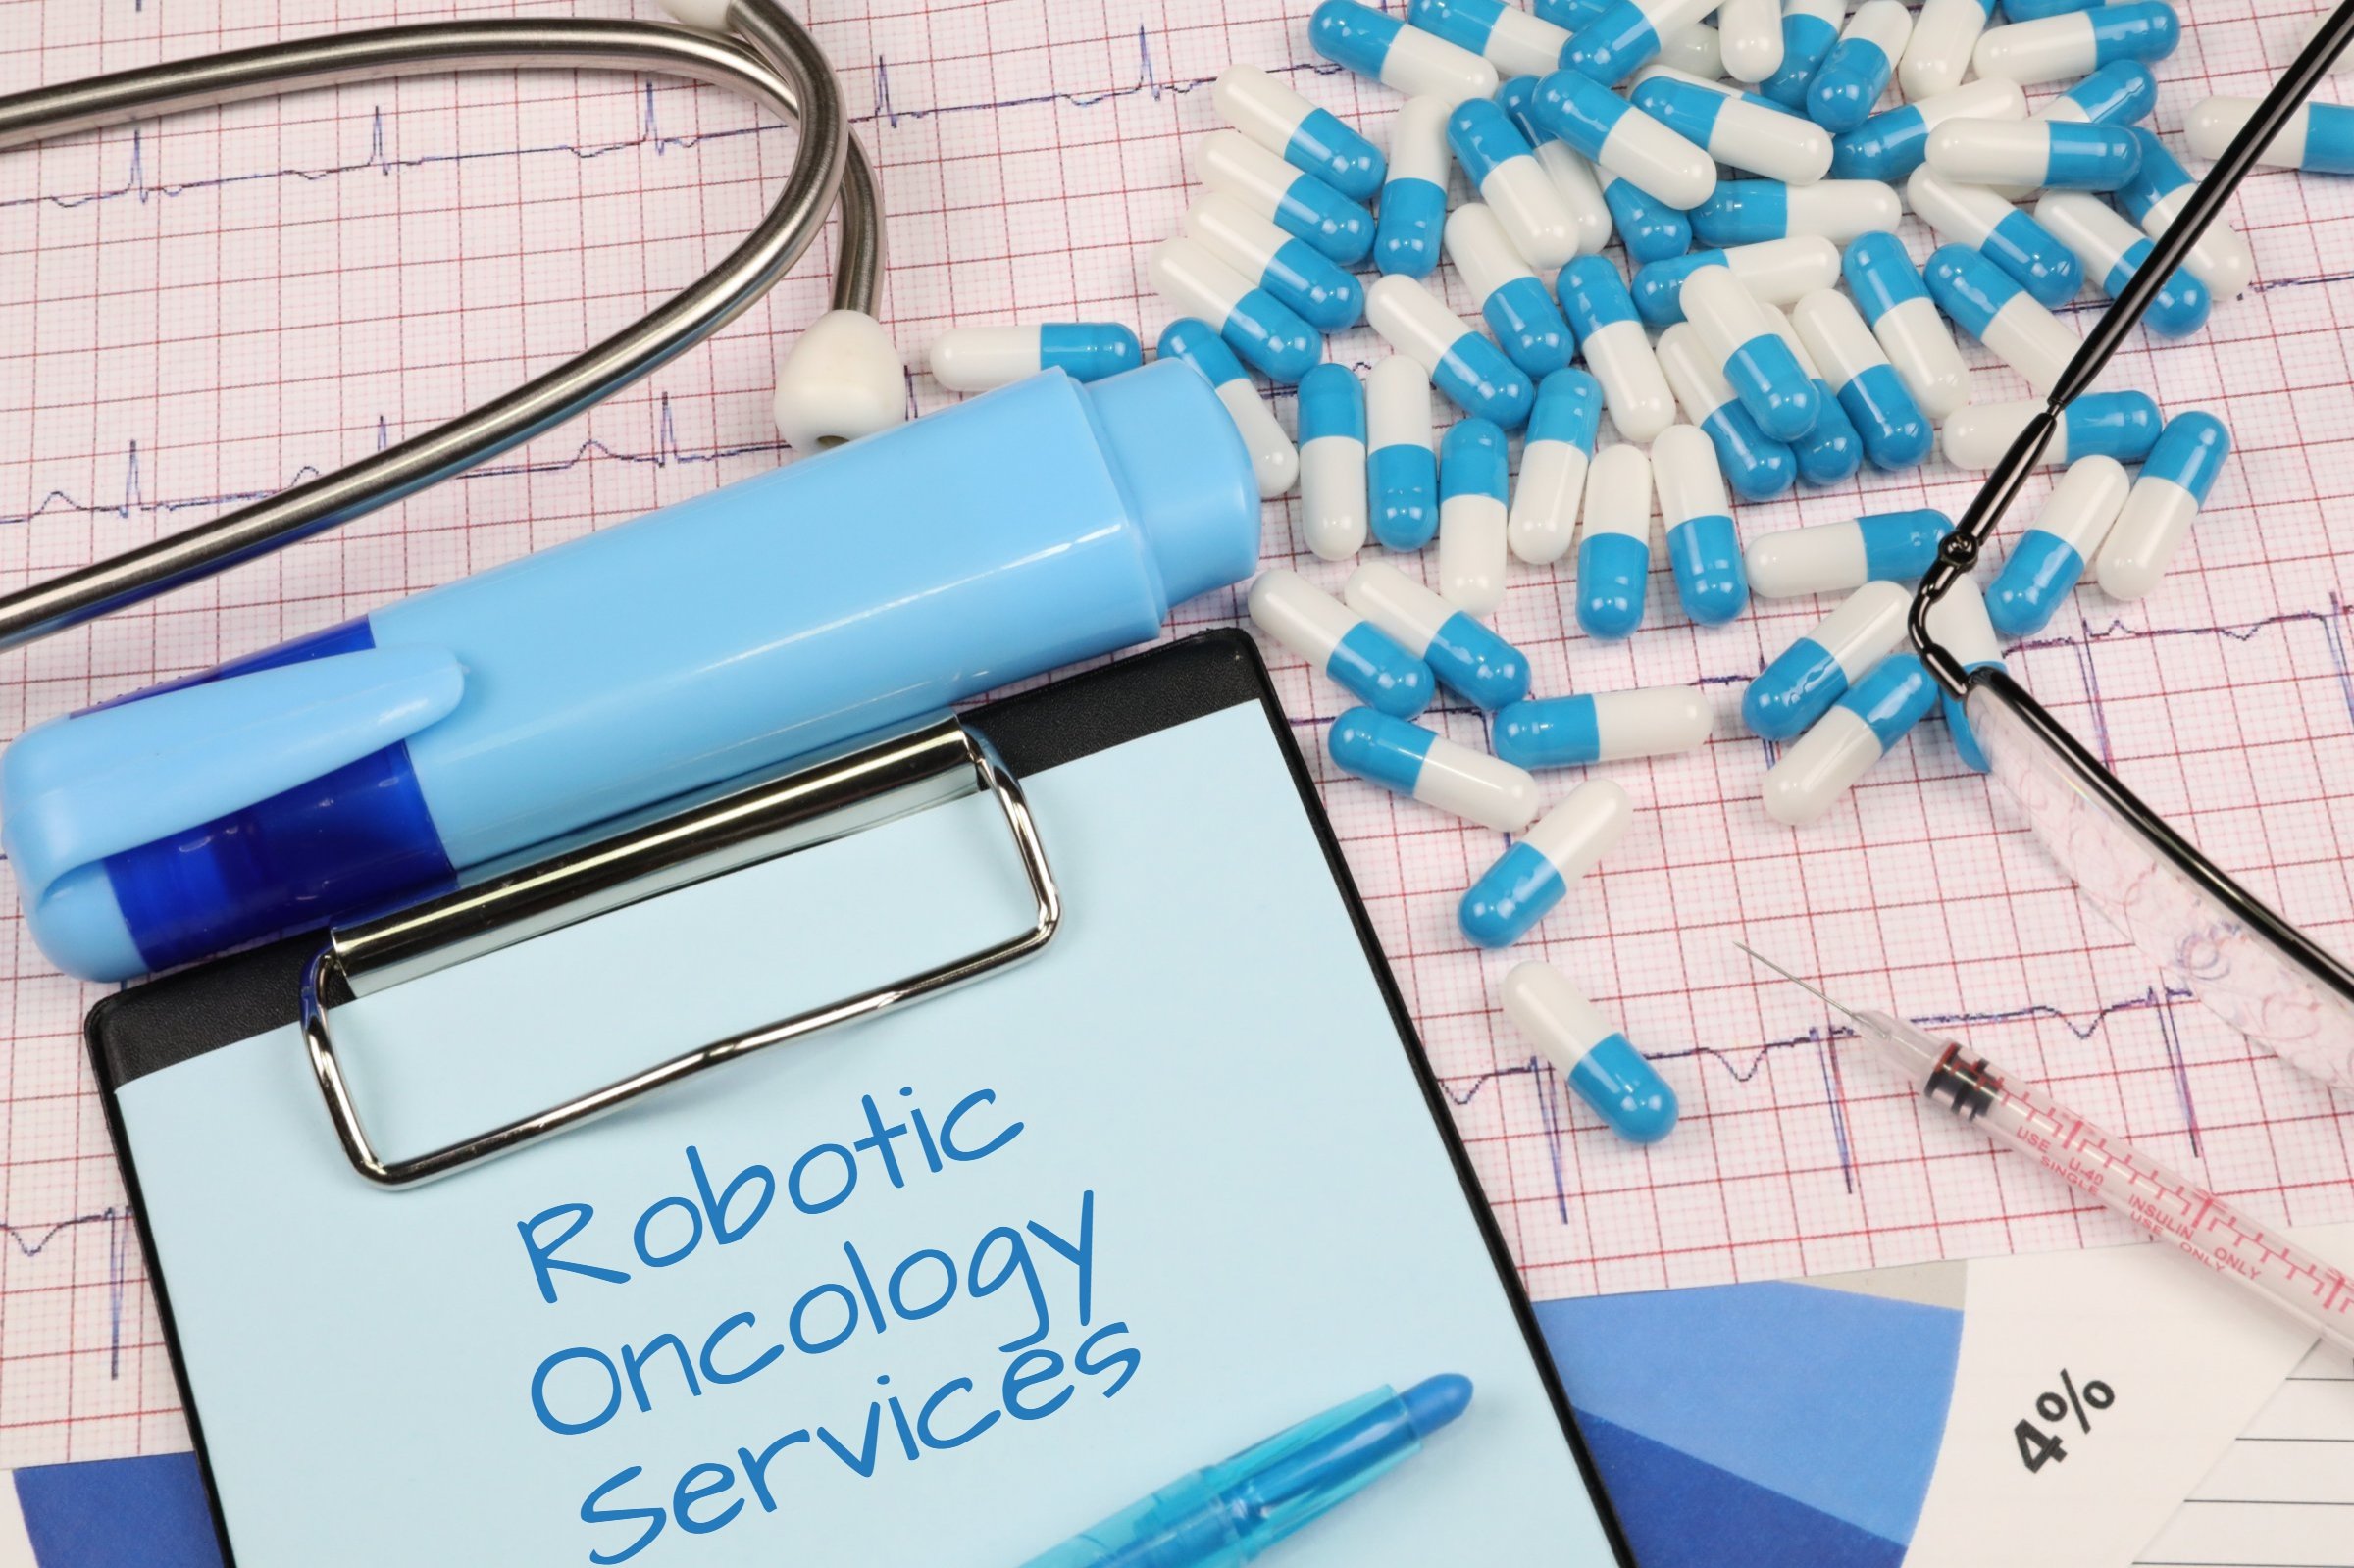 robotic oncology services